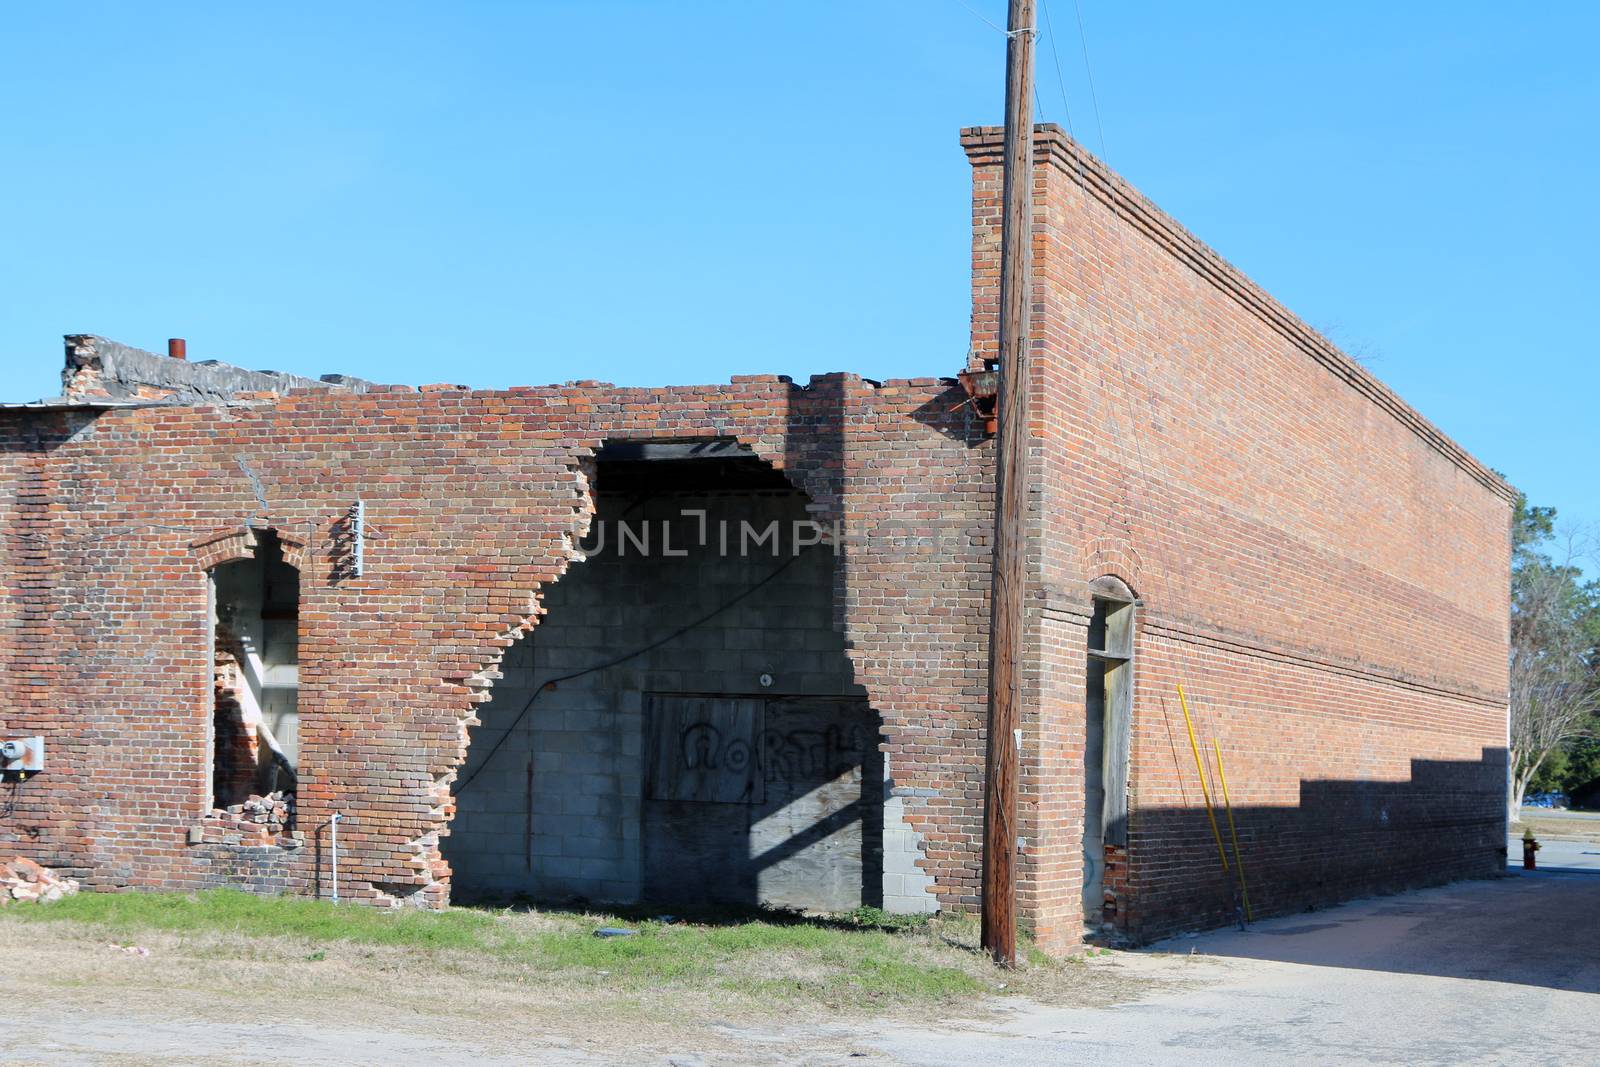 Abandoned and damaged brick building with large hole in the rear wall.